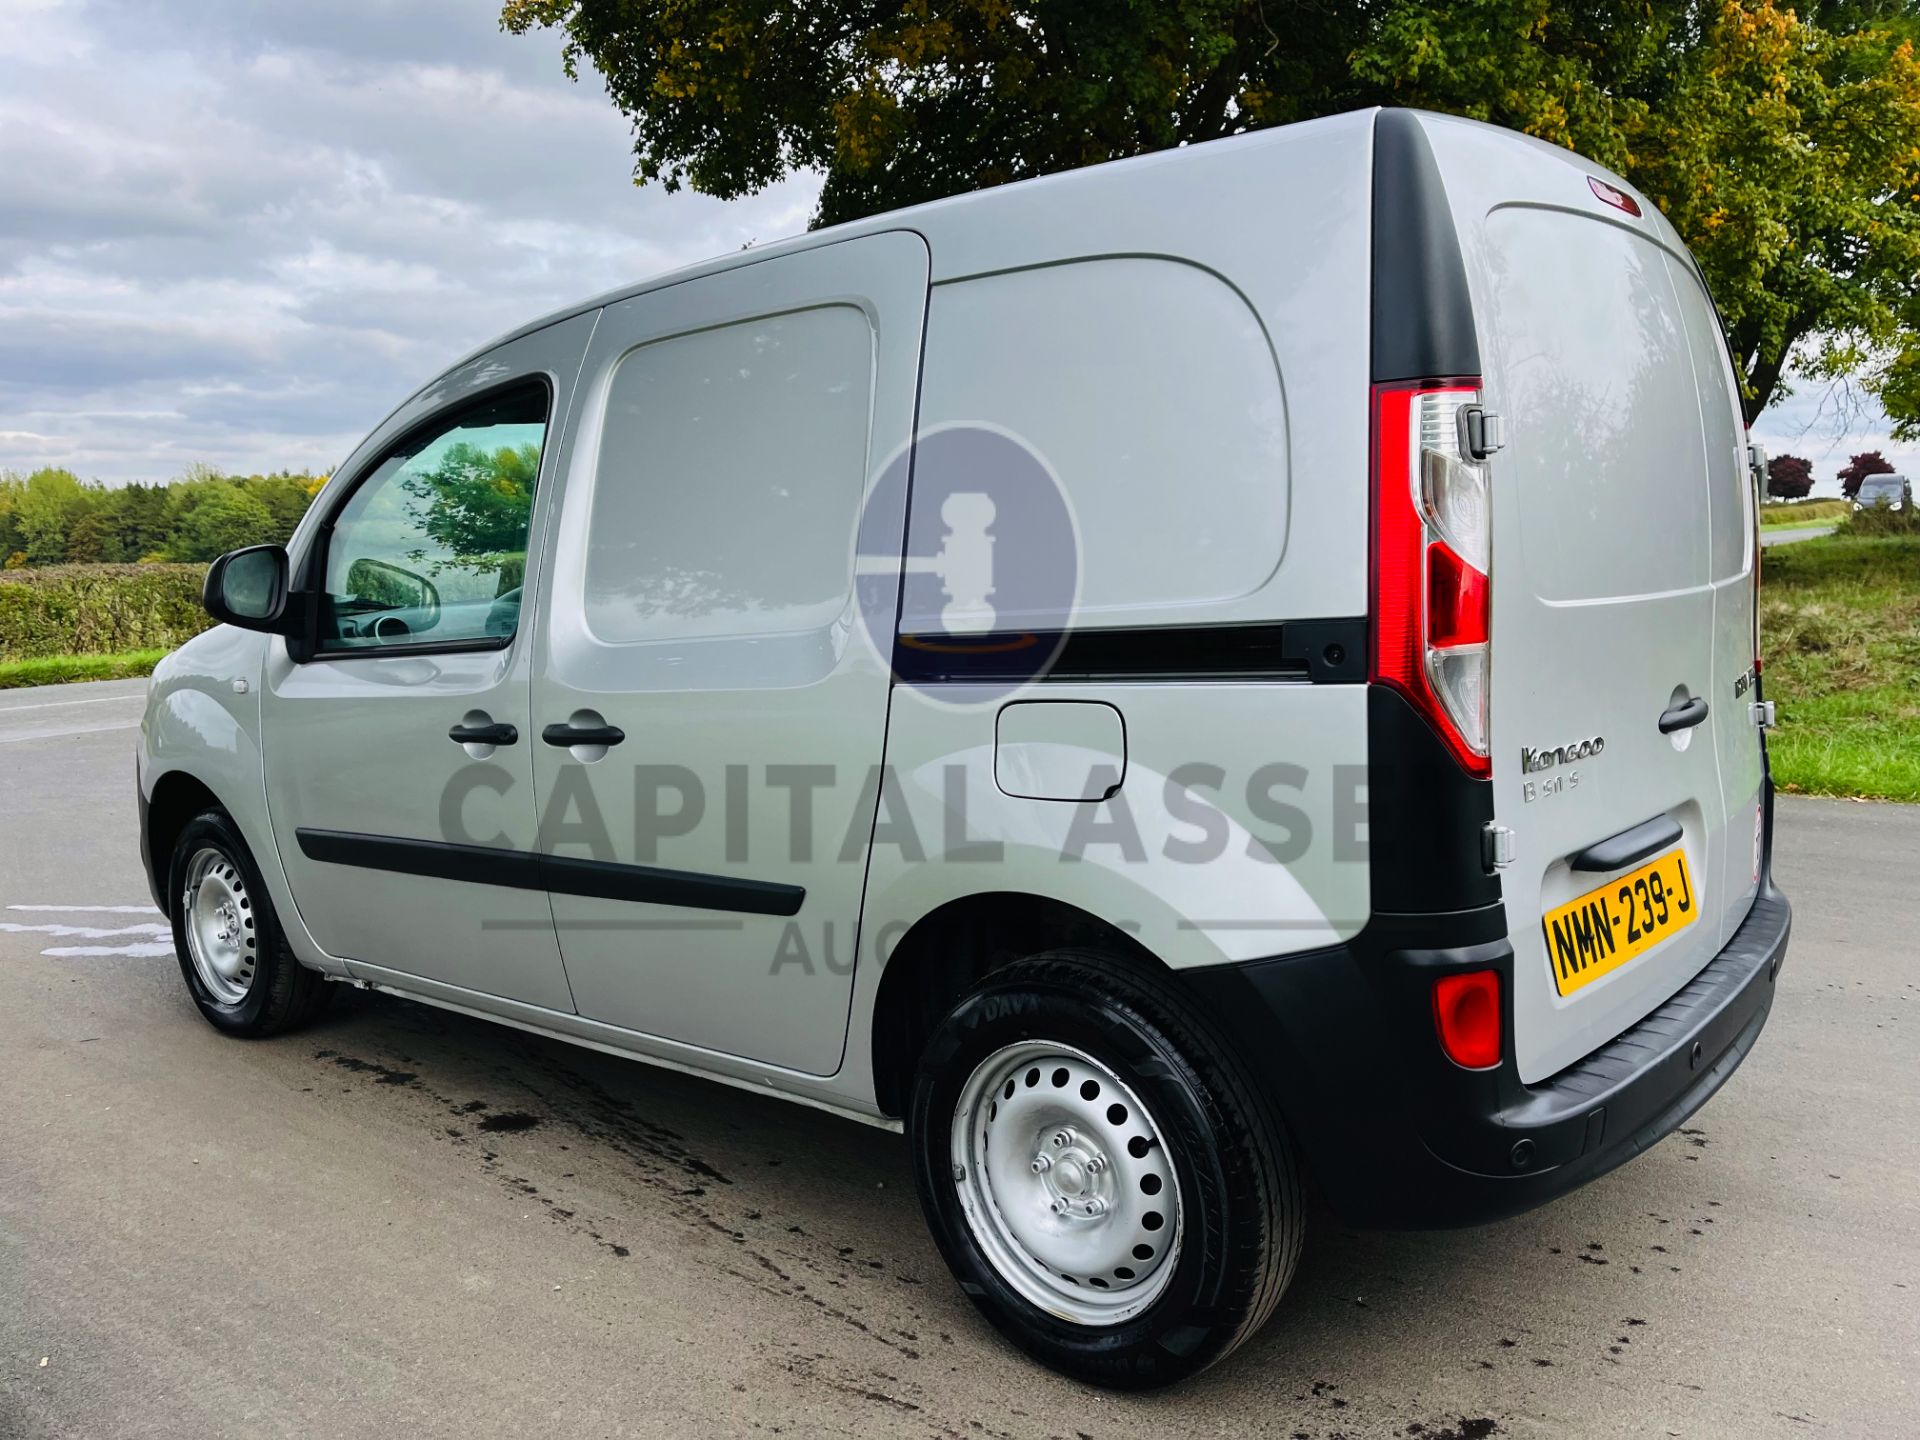 RENAULT KANGOO 1.5DCI "BUSINESS EDITION" (2018) EURO 6 - 6 SPEED - AIR CON - STOP / START -ELEC PACK - Image 9 of 22